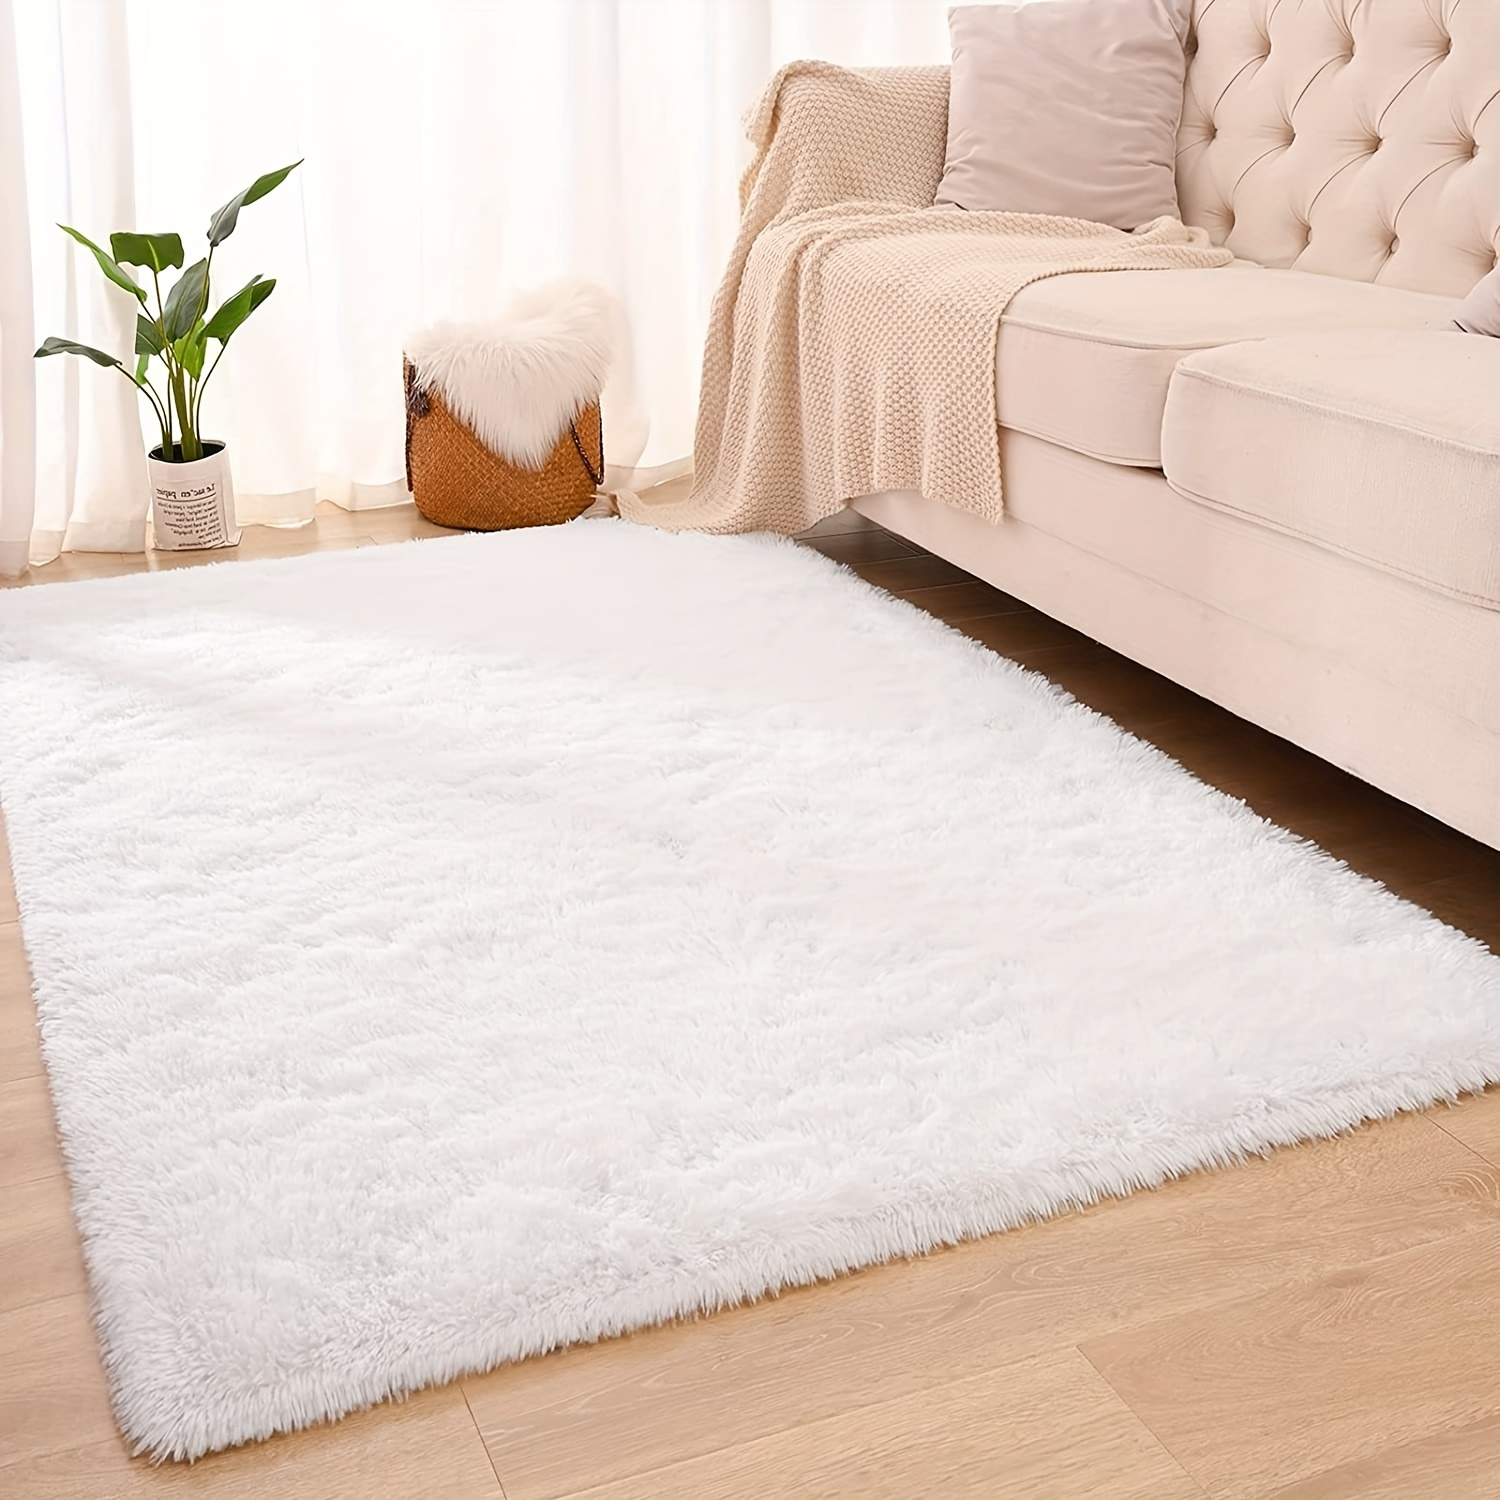 Ultra Soft Faux Rabbit Fur Rug, Area Rugs for Bedroom Floor Living Room,  Carpet Accent Rugs White - China Faux Rabbit Fur Rug and Accent Rugs price